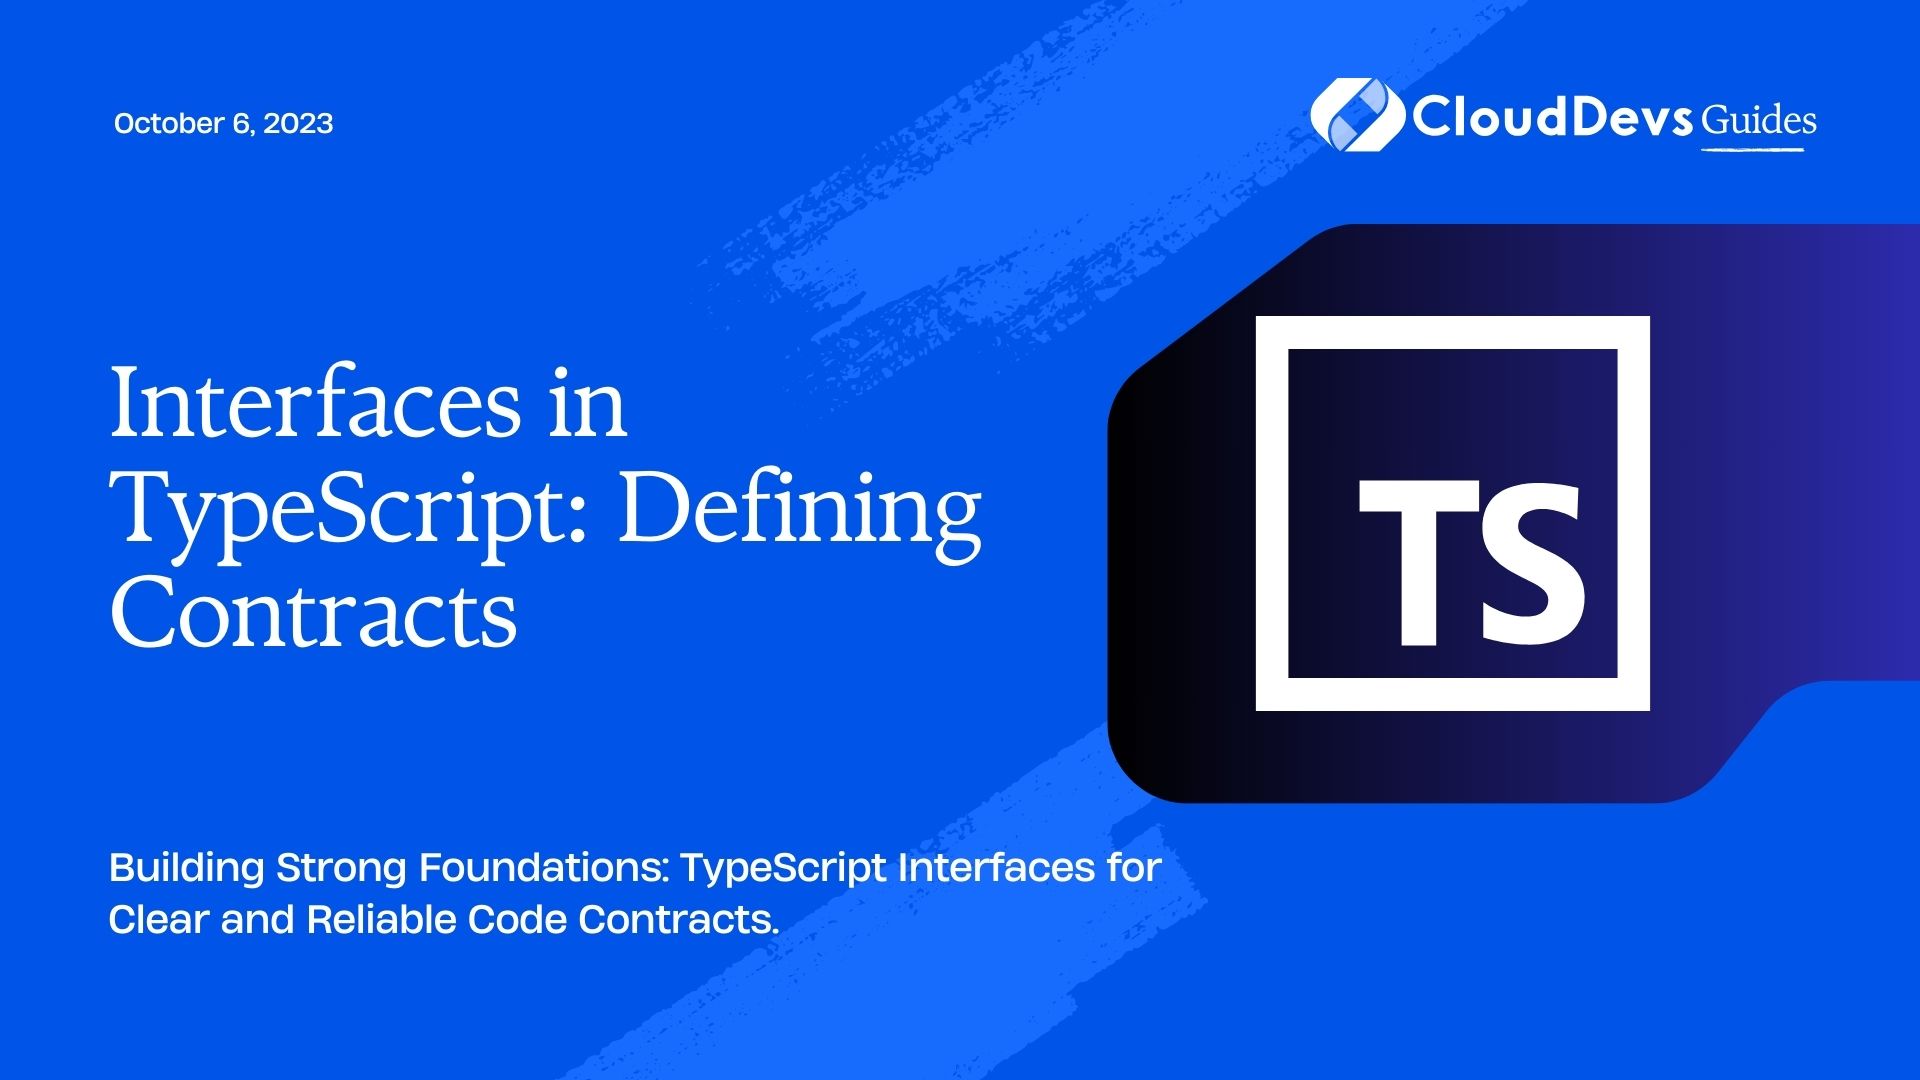 Interfaces in TypeScript: Defining Contracts